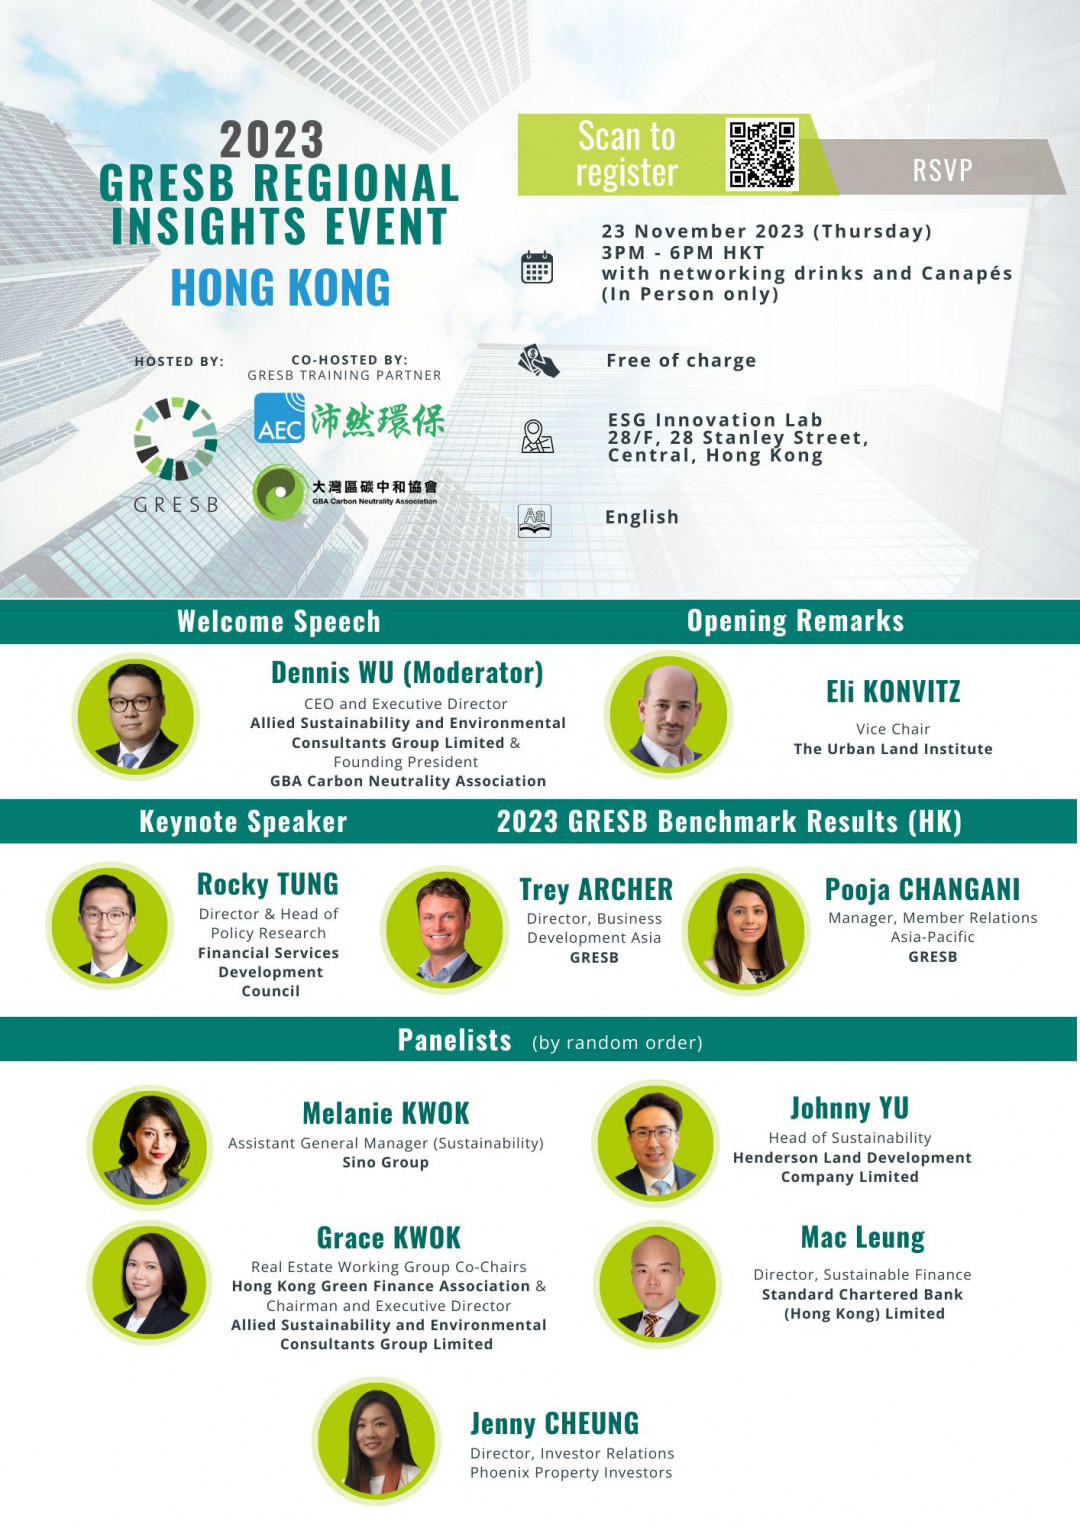 Join us to explore ideas to improve real estate sustainability at the 2023 GRESB Regional Insights: Hong Kong Event!